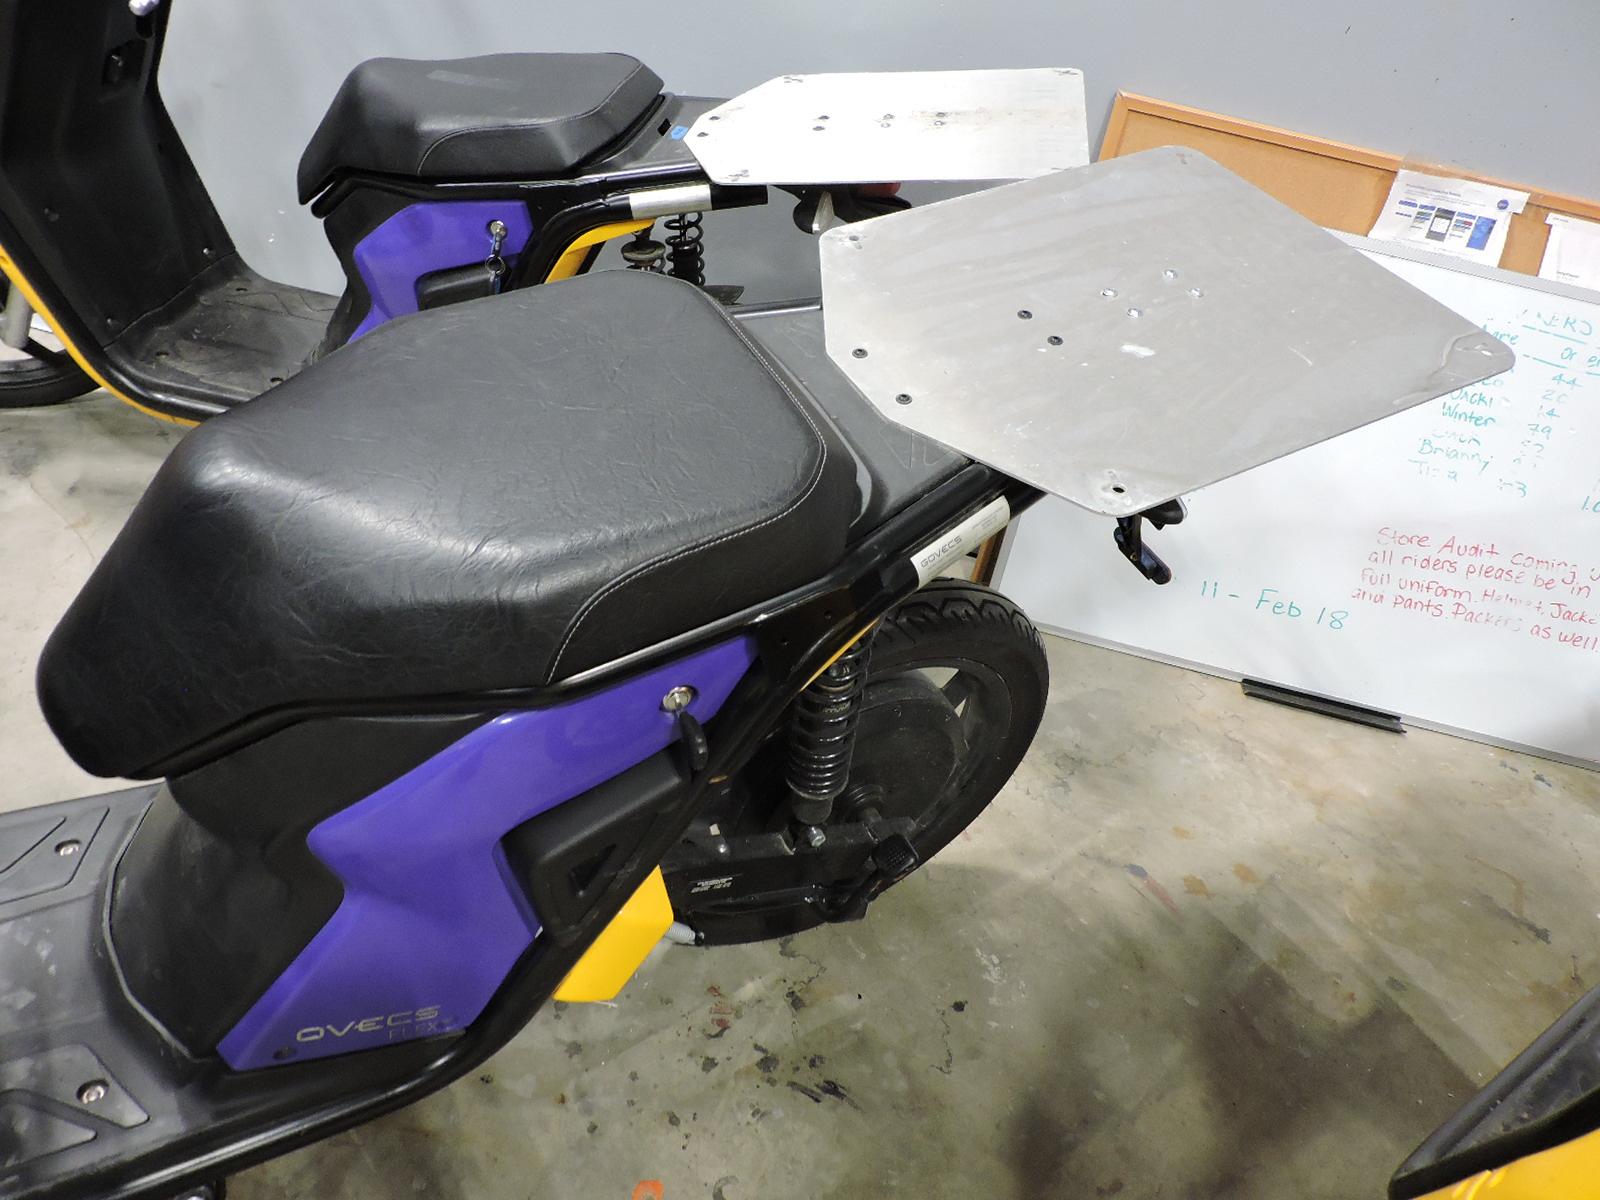 GOVECS FLEX 2.0 - Electric Scooter - Moped / 1461.3 Mi / 2 Keys, Battery & Charger - Runs Well